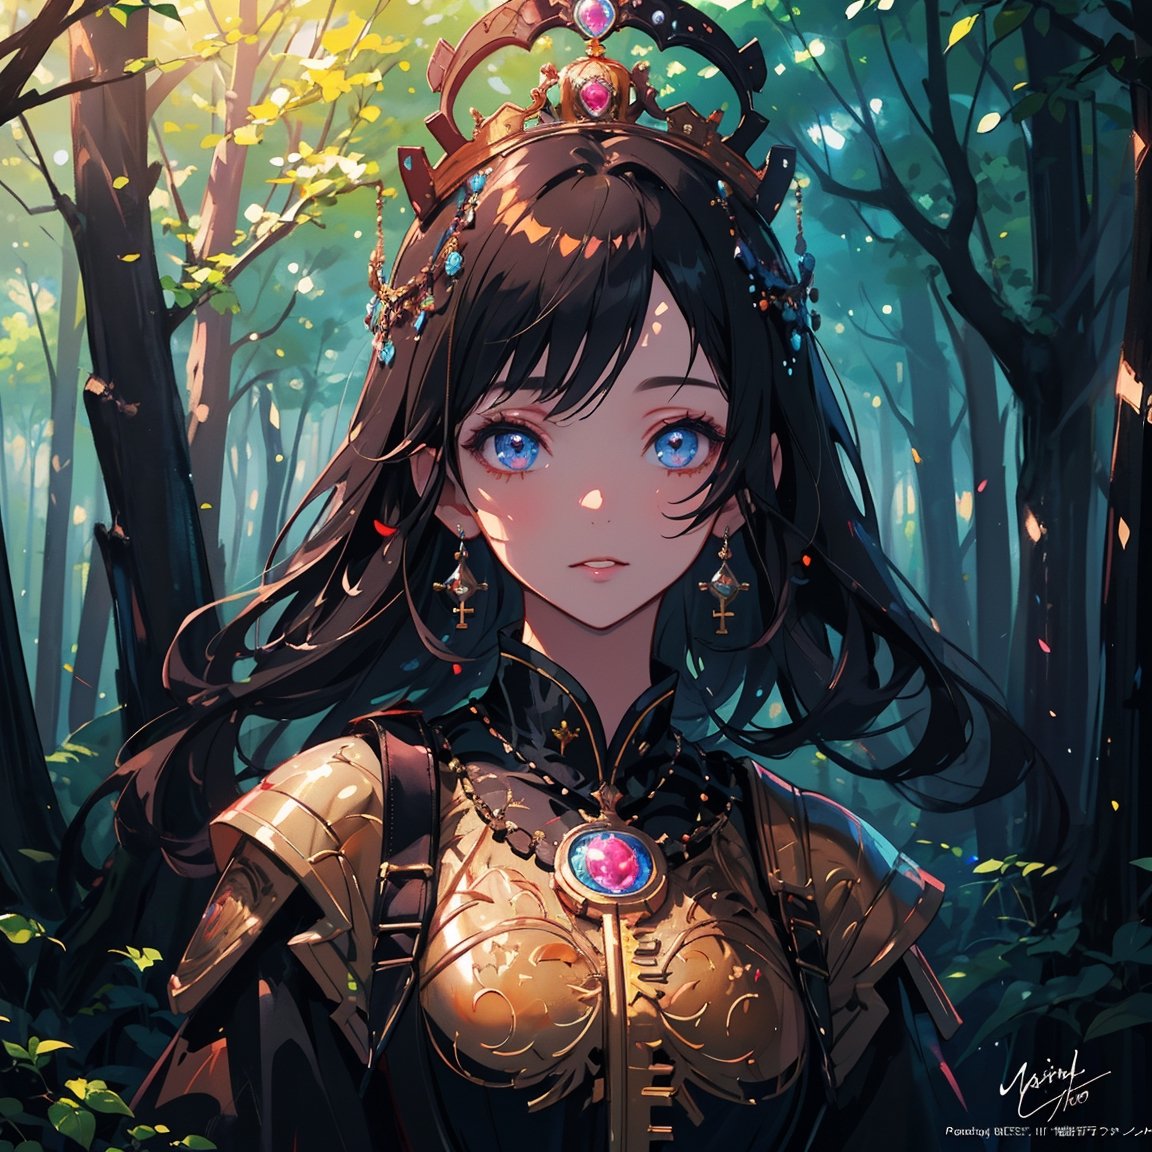 masterpiece, key visual, best quality, sharp image, professional artwork, intricate, highly detailed, 1girl, looking to side, jeweled crown, close-up, cinematic lighting, fantasy art, digital painting, ethereal glow, vibrant colors, forest, best quality, masterpiececopia ,fantasy00d